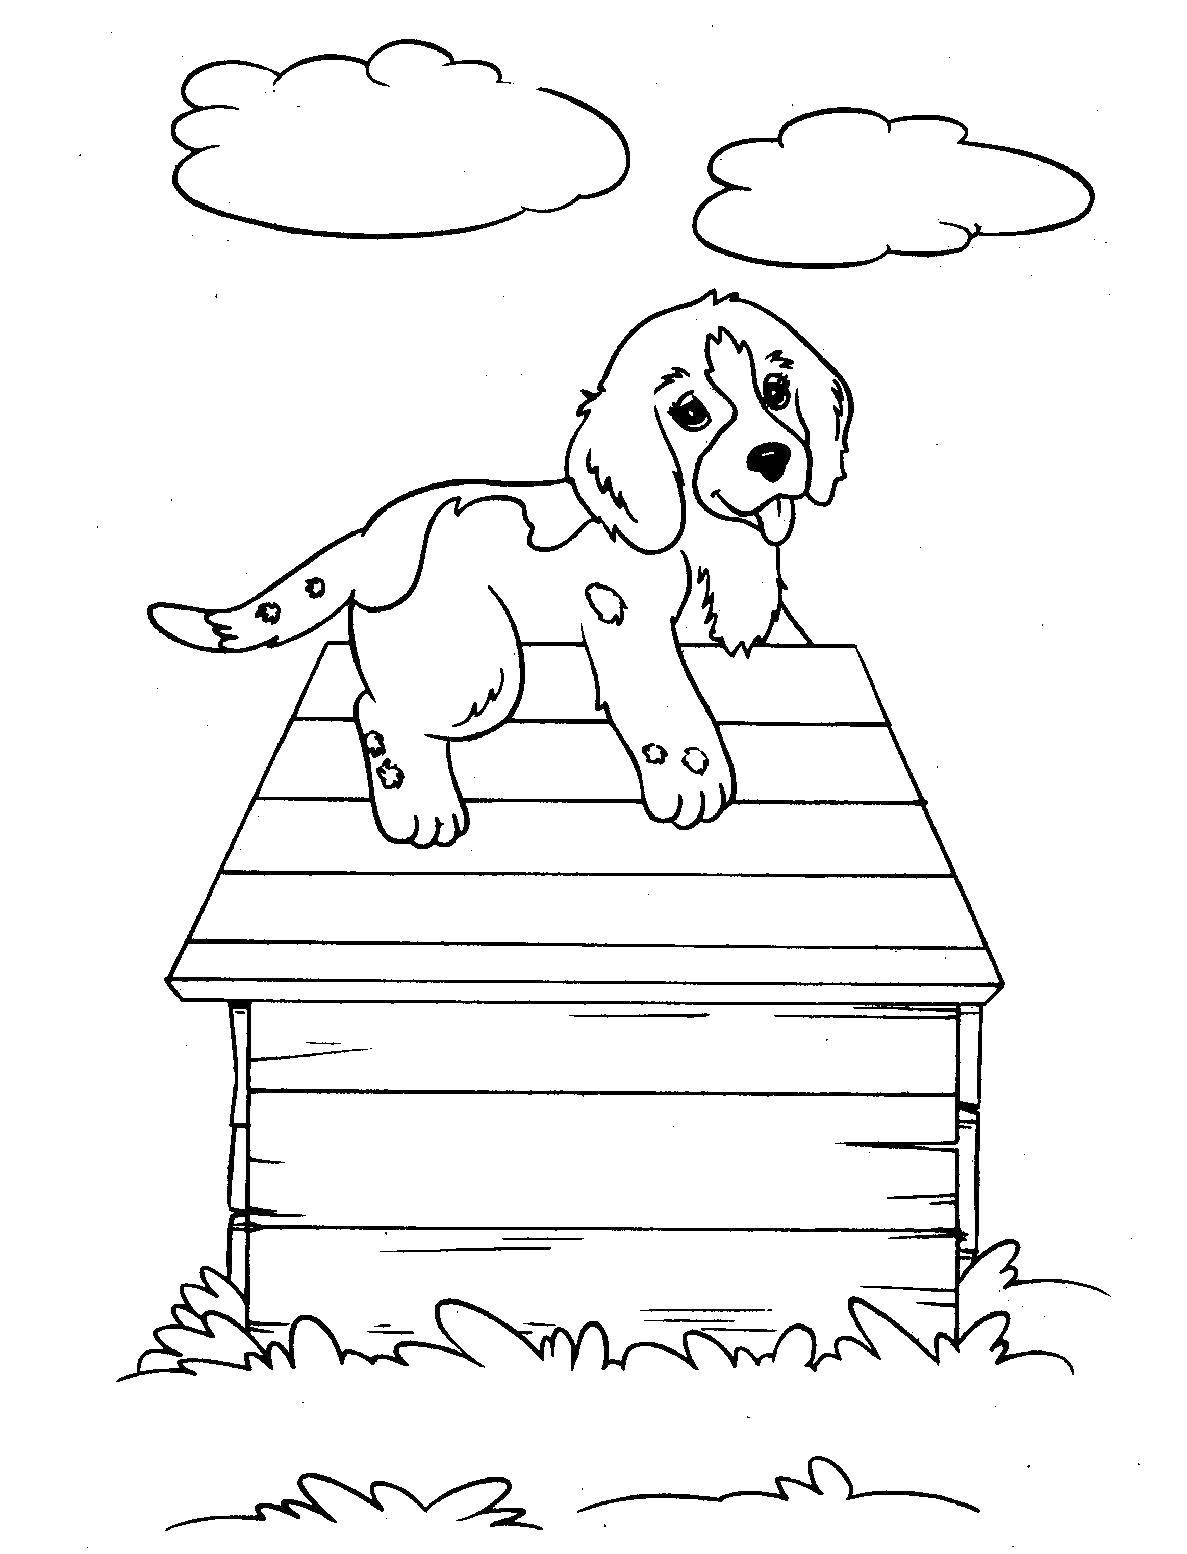 Coloring The puppy on the roof of the booth. Category dogs. Tags:  the dog.